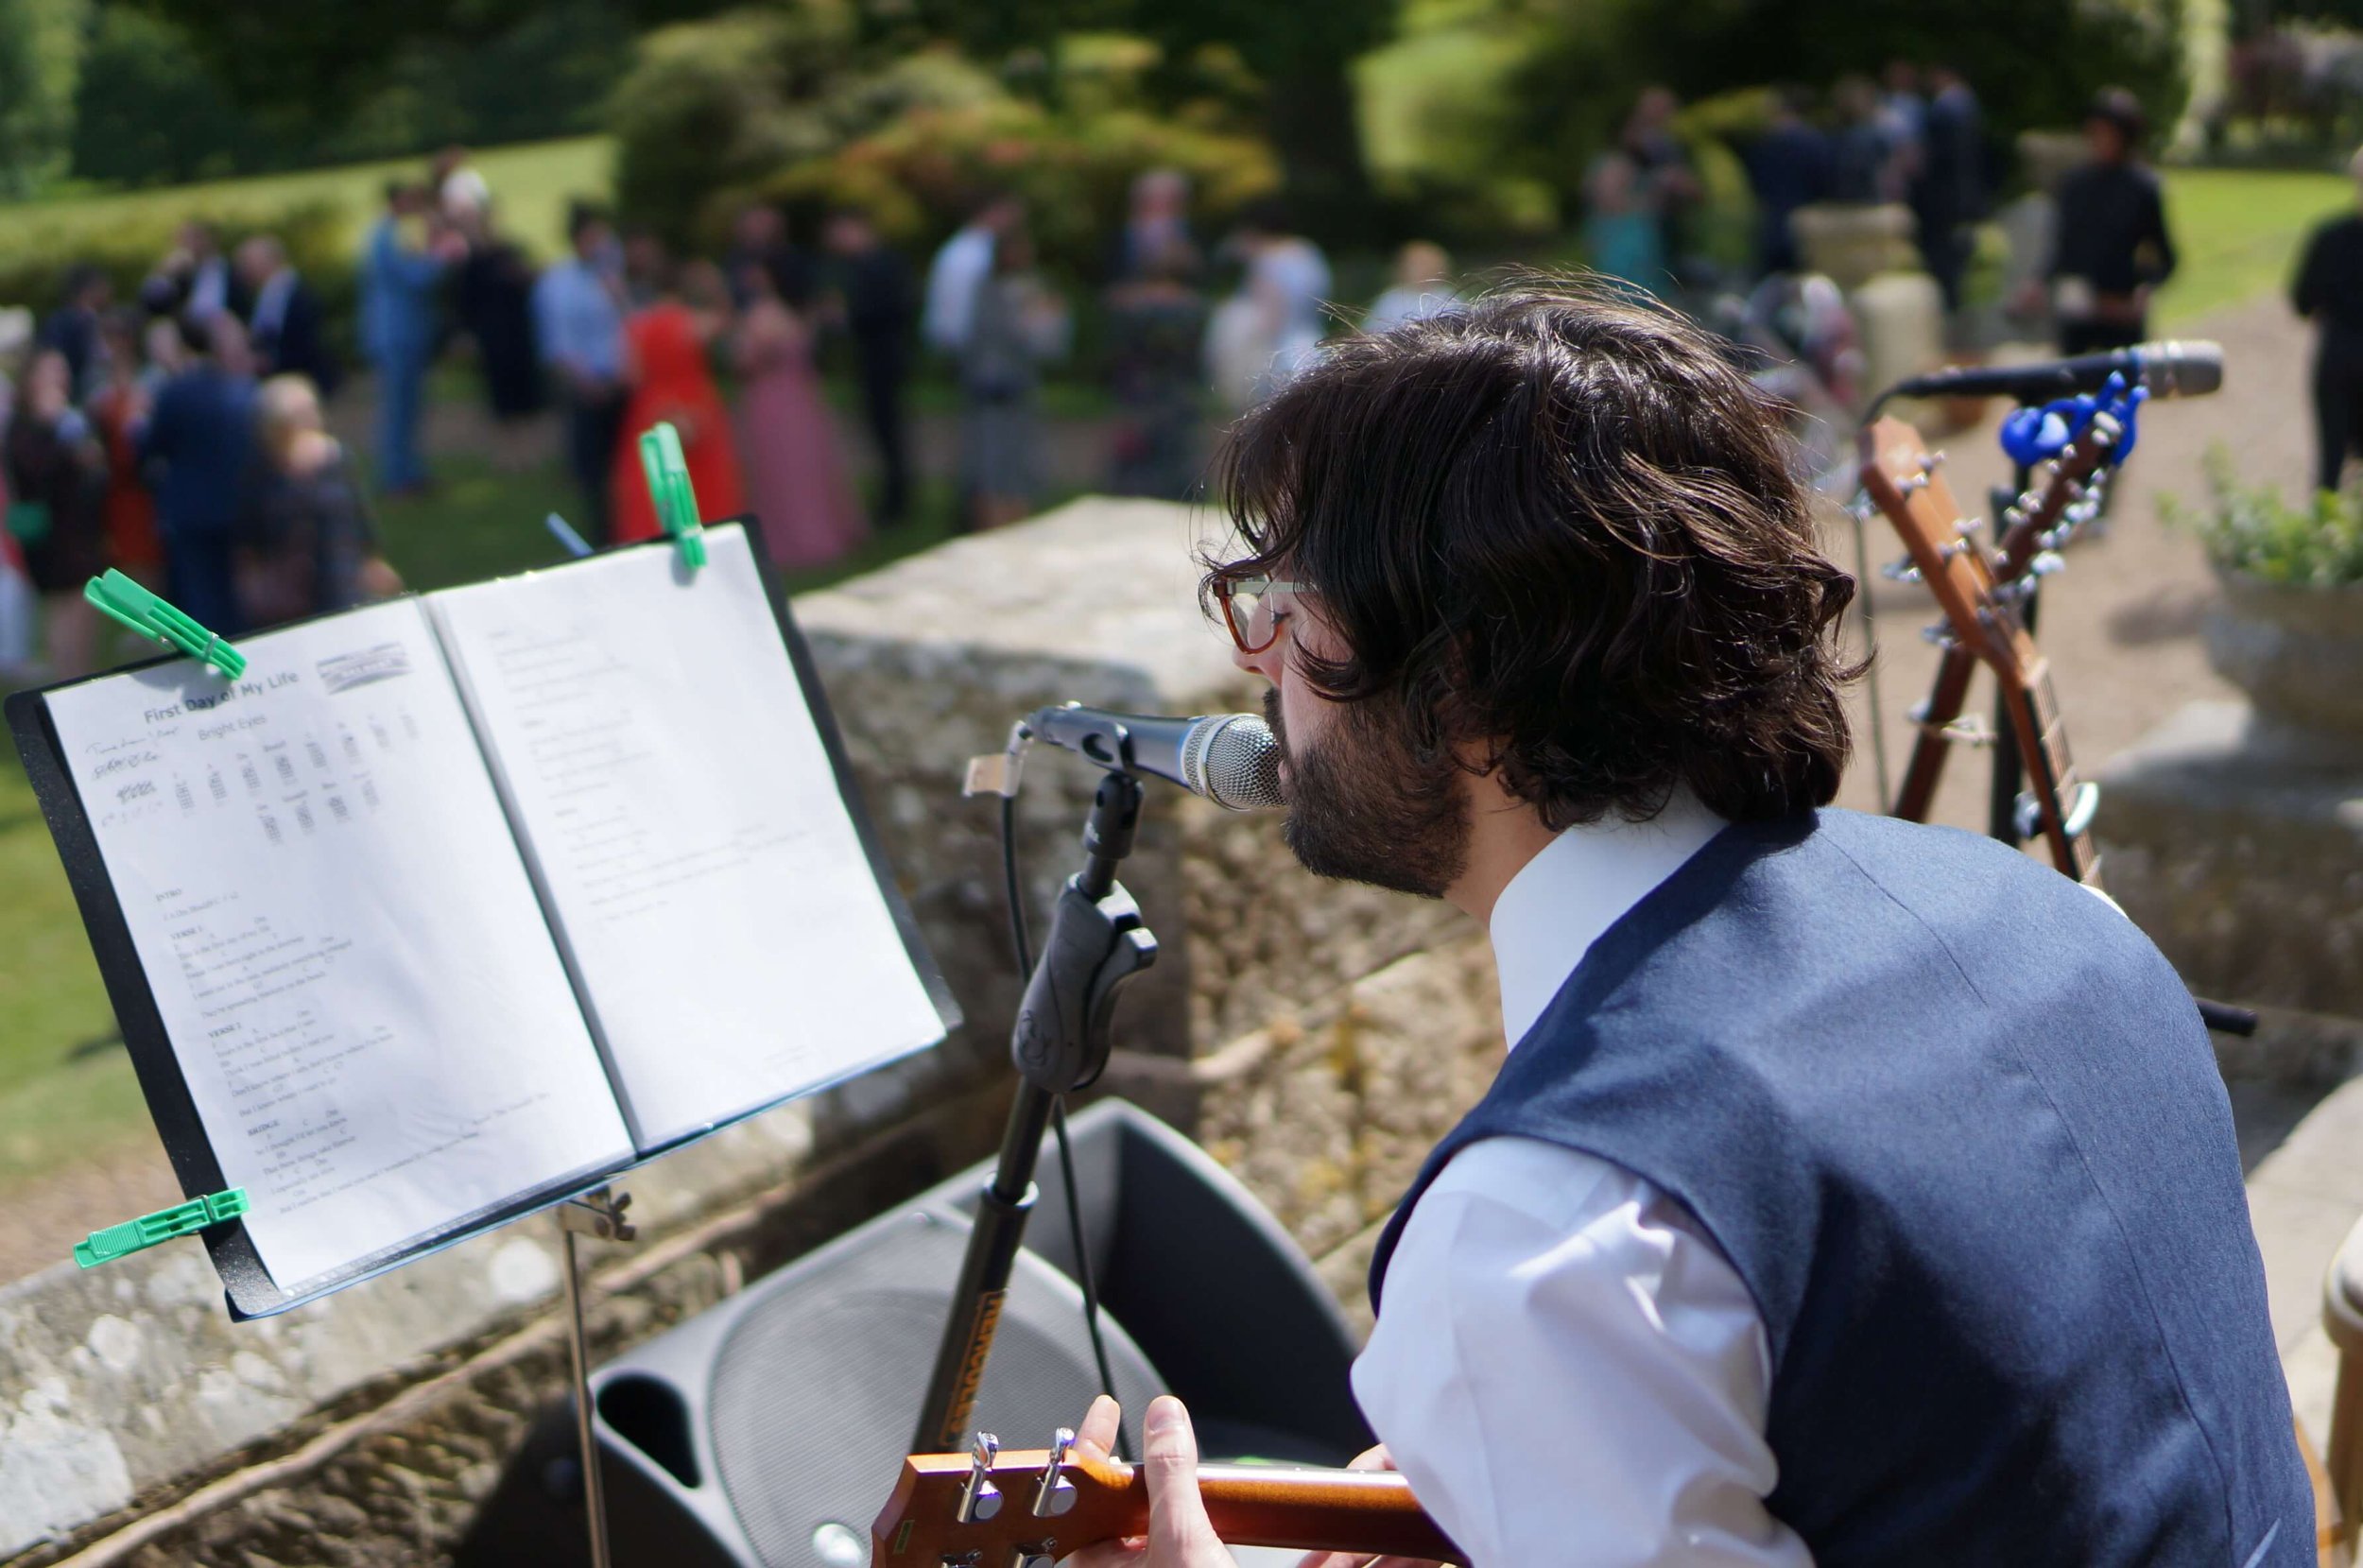  The indie-folk acoustic musician is sat outside in the sunshine entertaining a crowd of wedding guests as he plays his acoustic guitar and sings. 